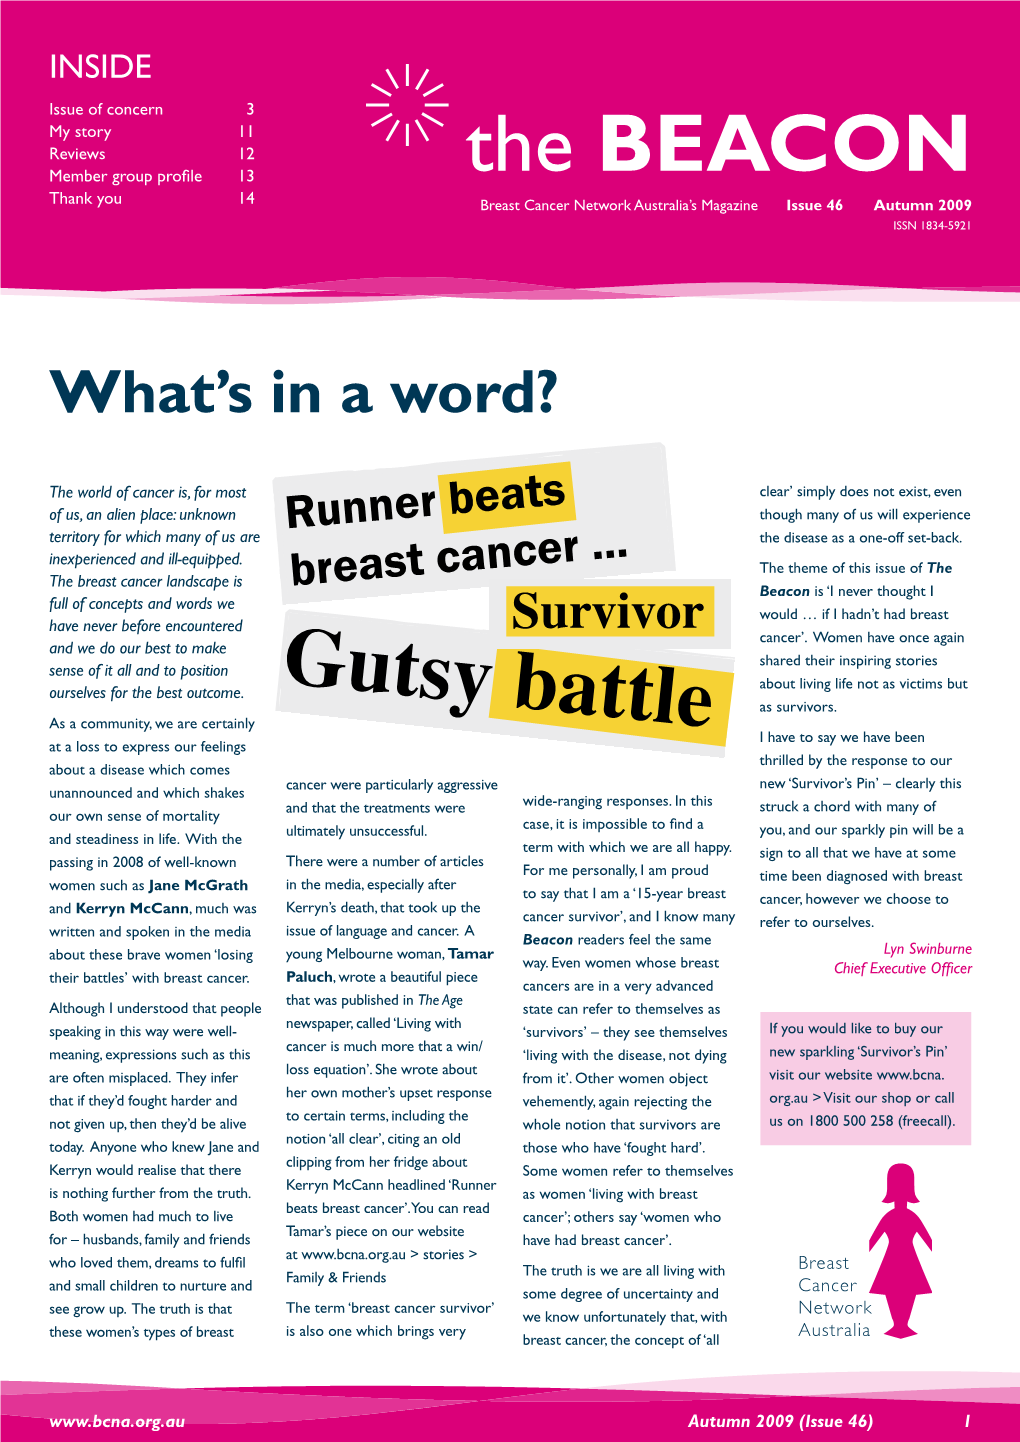 The BEACON Thank You 14 Breast Cancer Network Australia’S Magazine Issue 46 Autumn 2009 ISSN 1834-5921